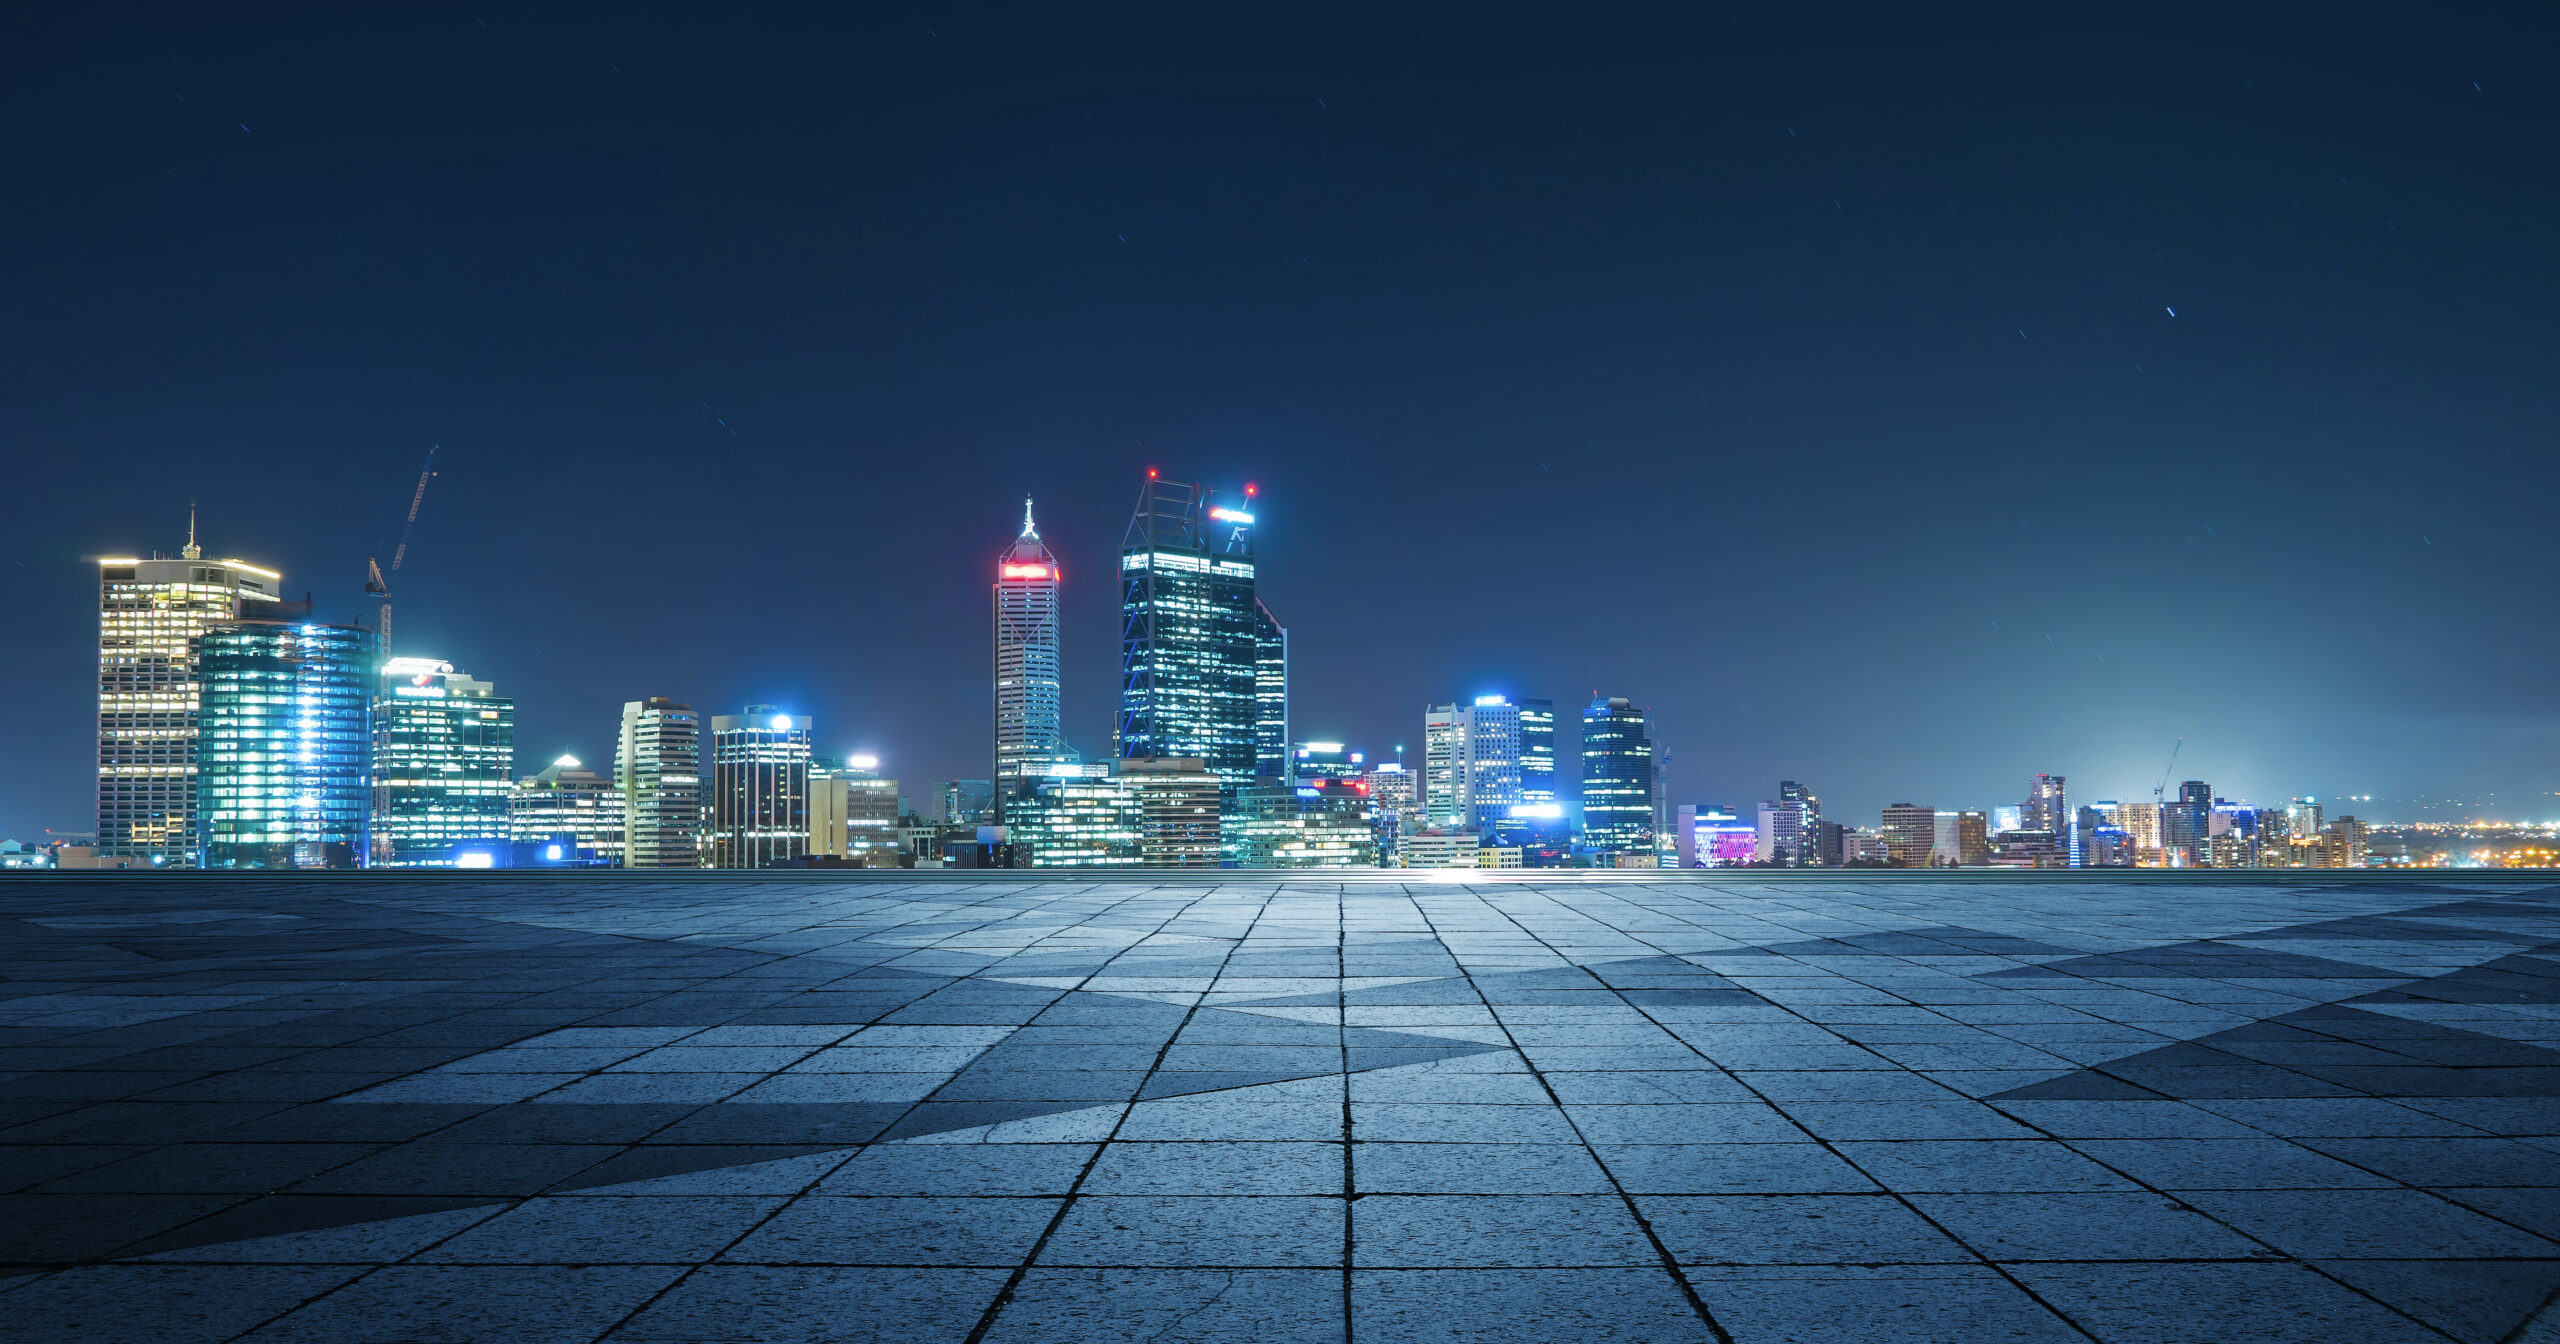 Panoramic skyline and buildings with empty concrete square floor,night scene